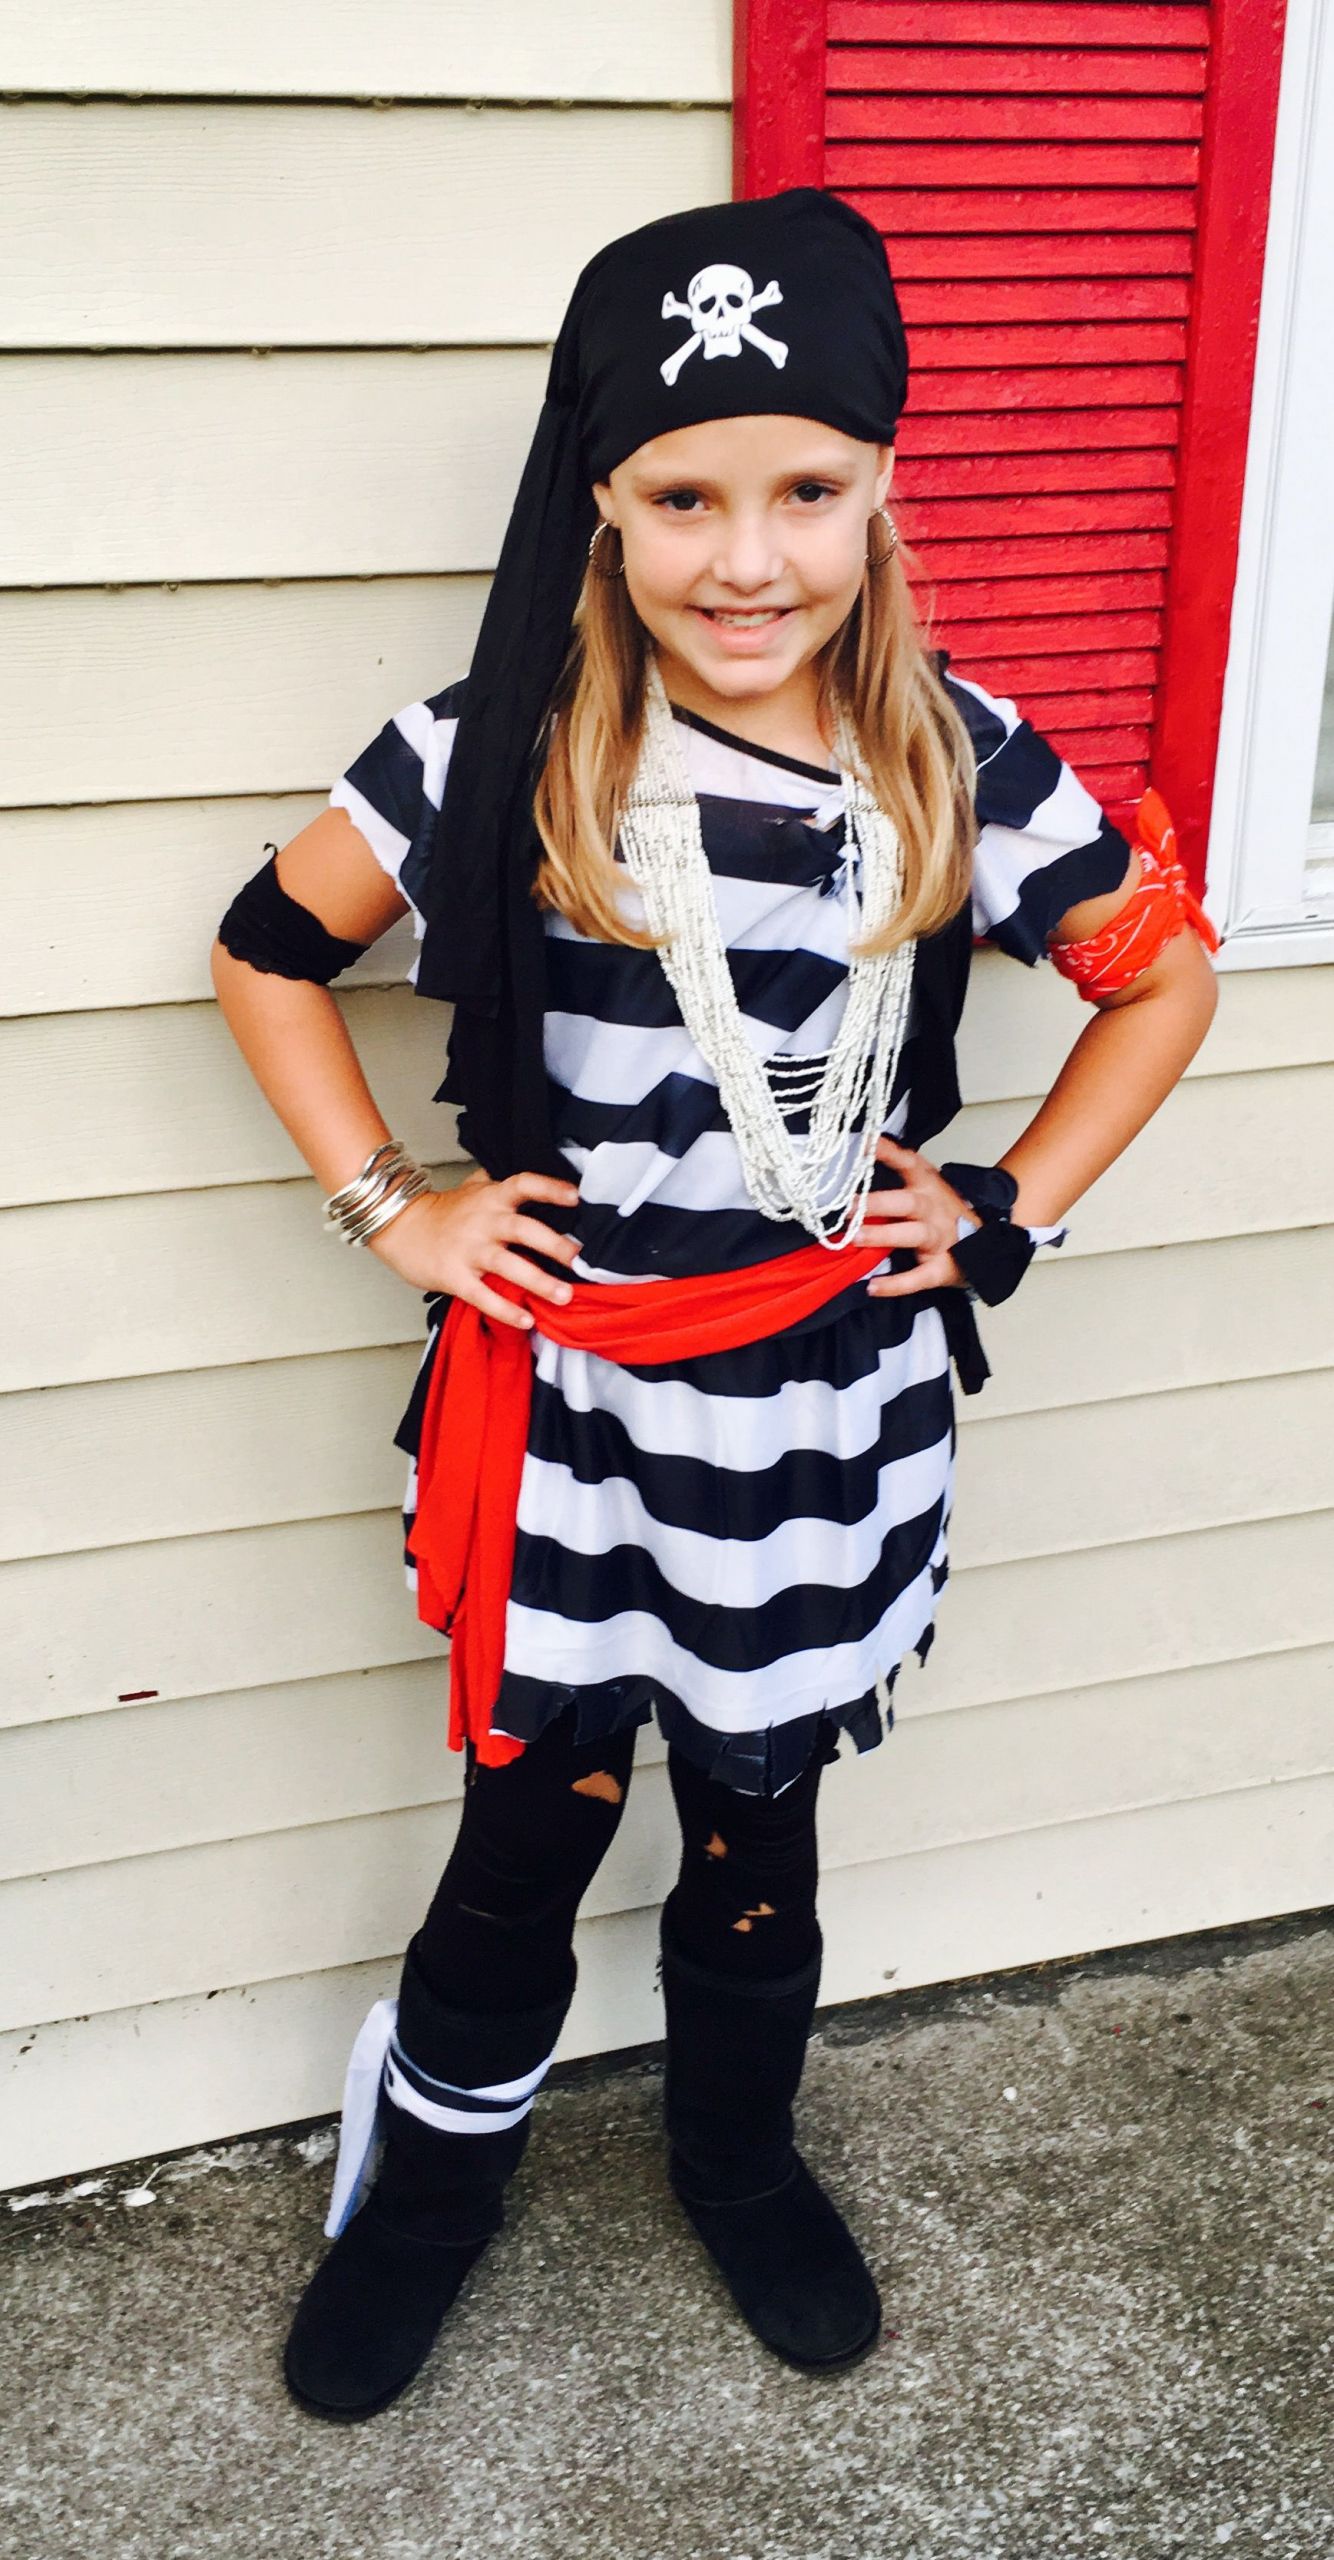 DIY Toddler Pirate Costume
 Easy girl s pirate costume made from cheap adult size